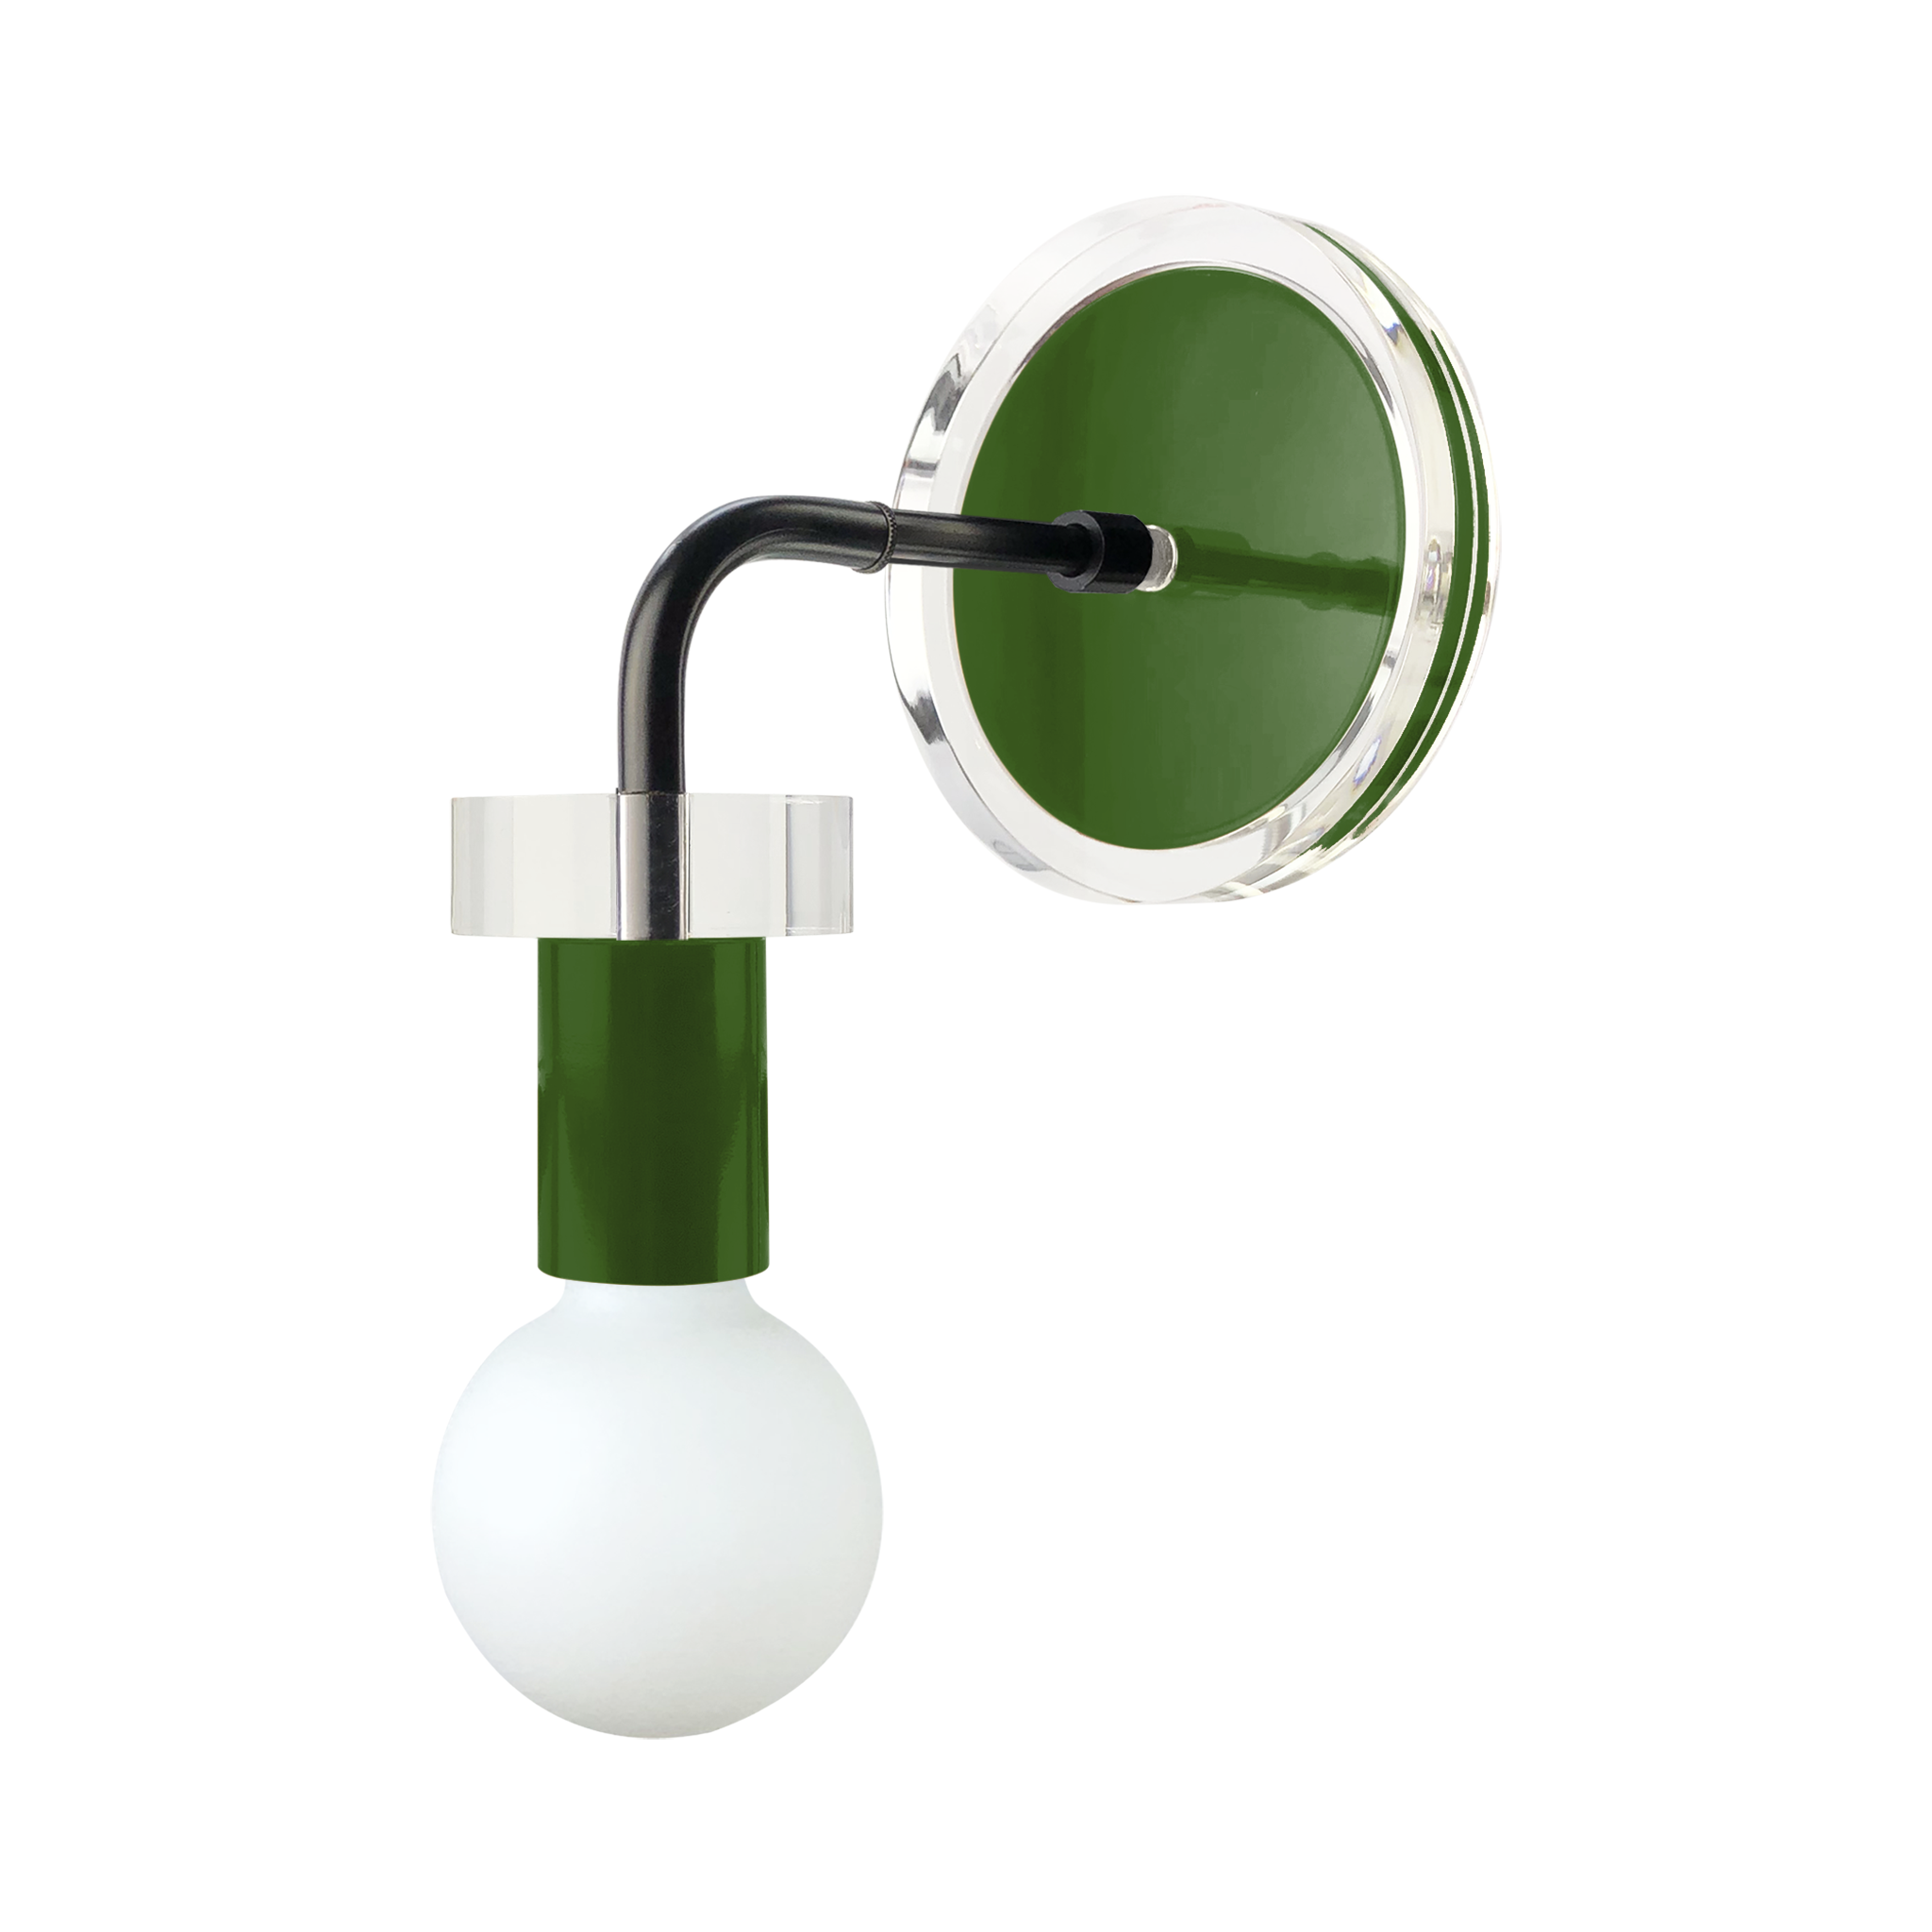 Black and python green color Adore sconce Dutton Brown lighting